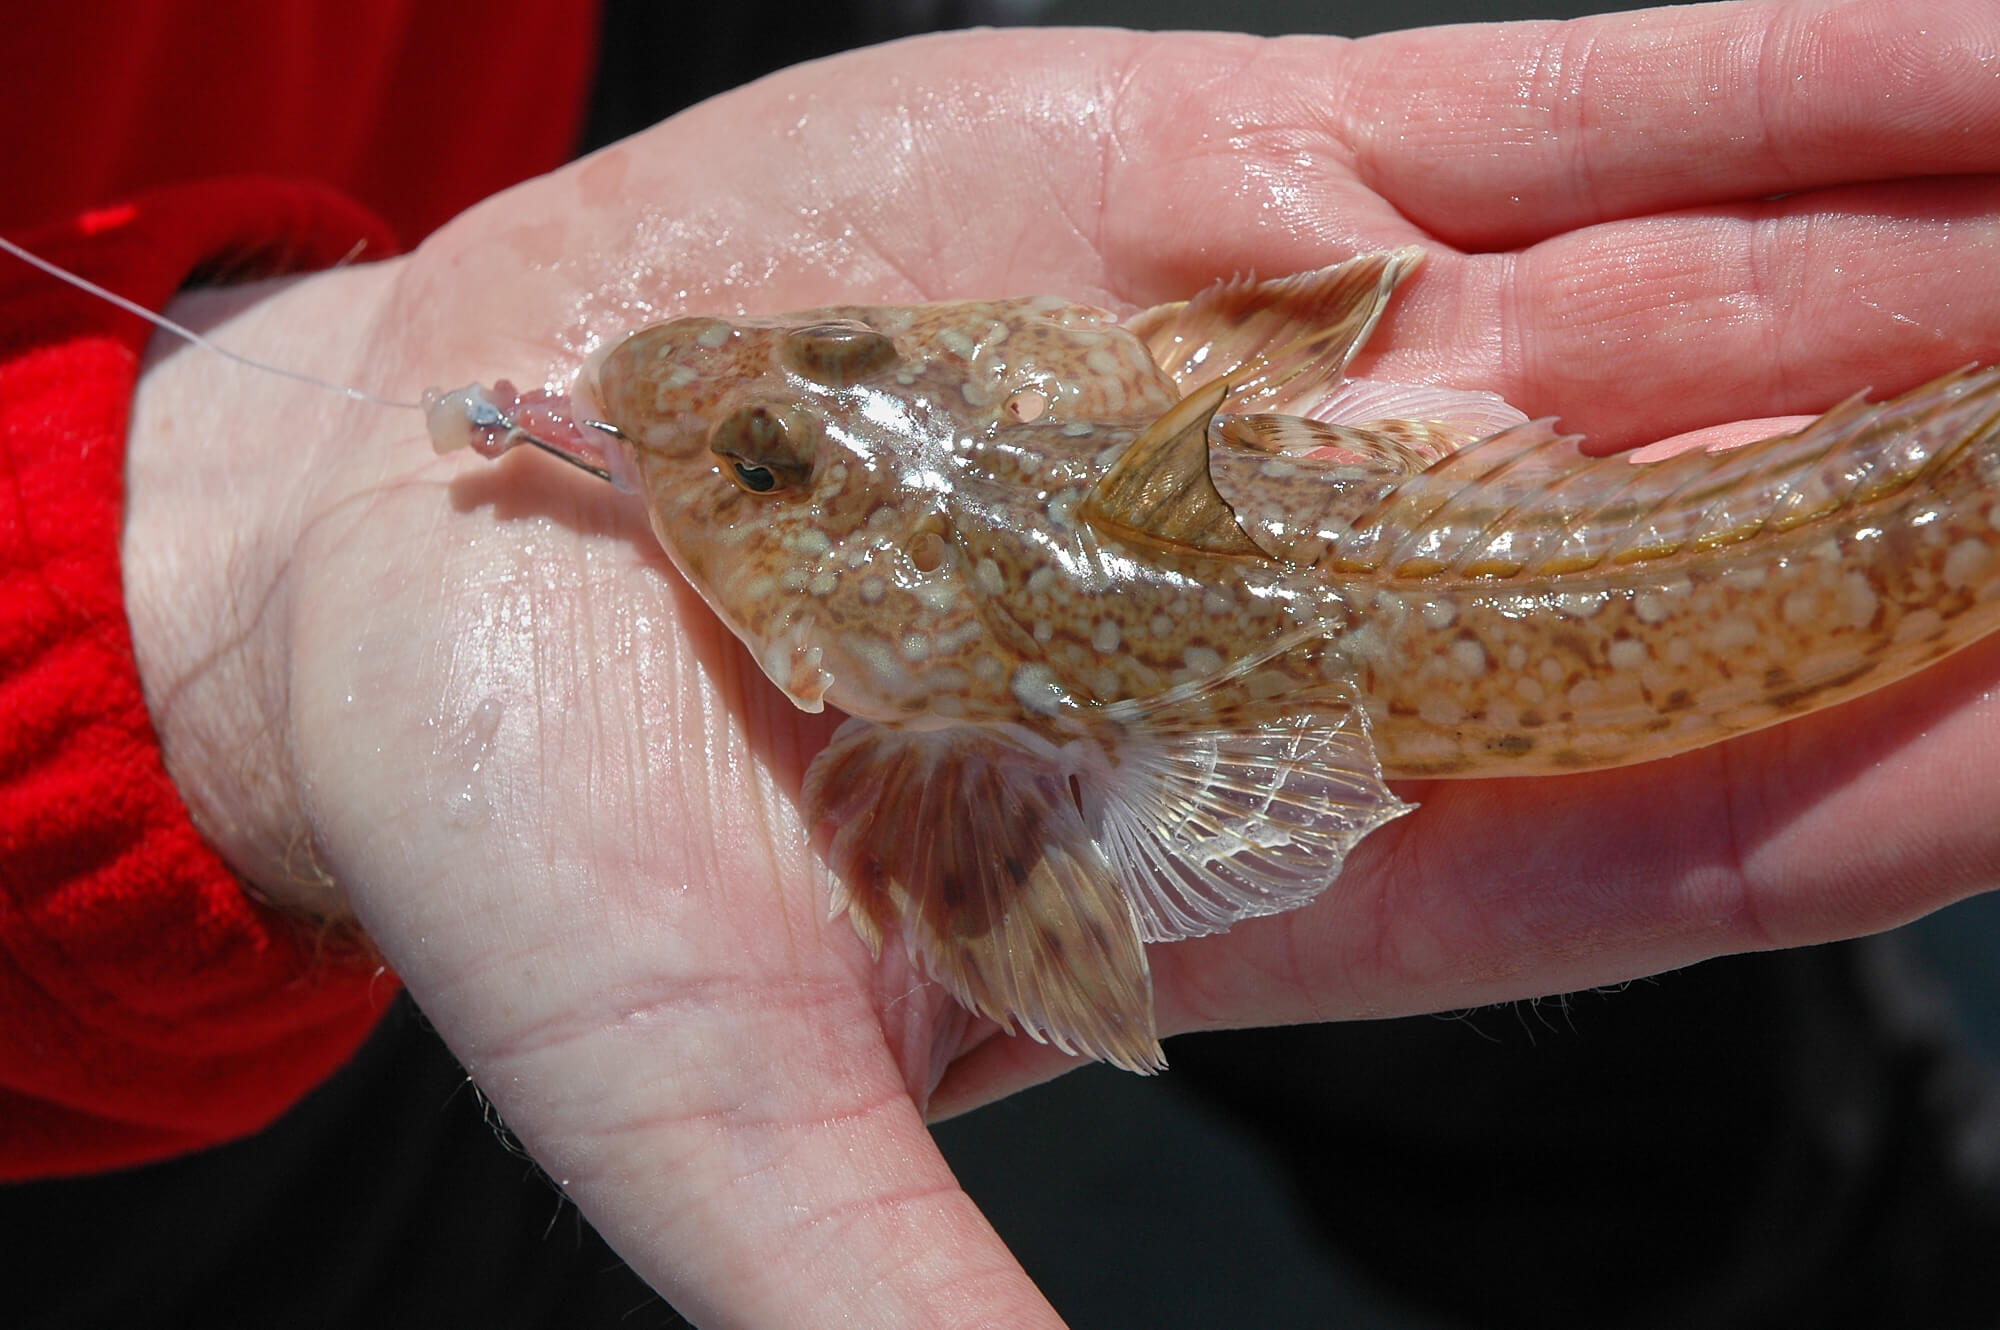 Smaller fish species like the dragonet are a staple of a gurnards diet.